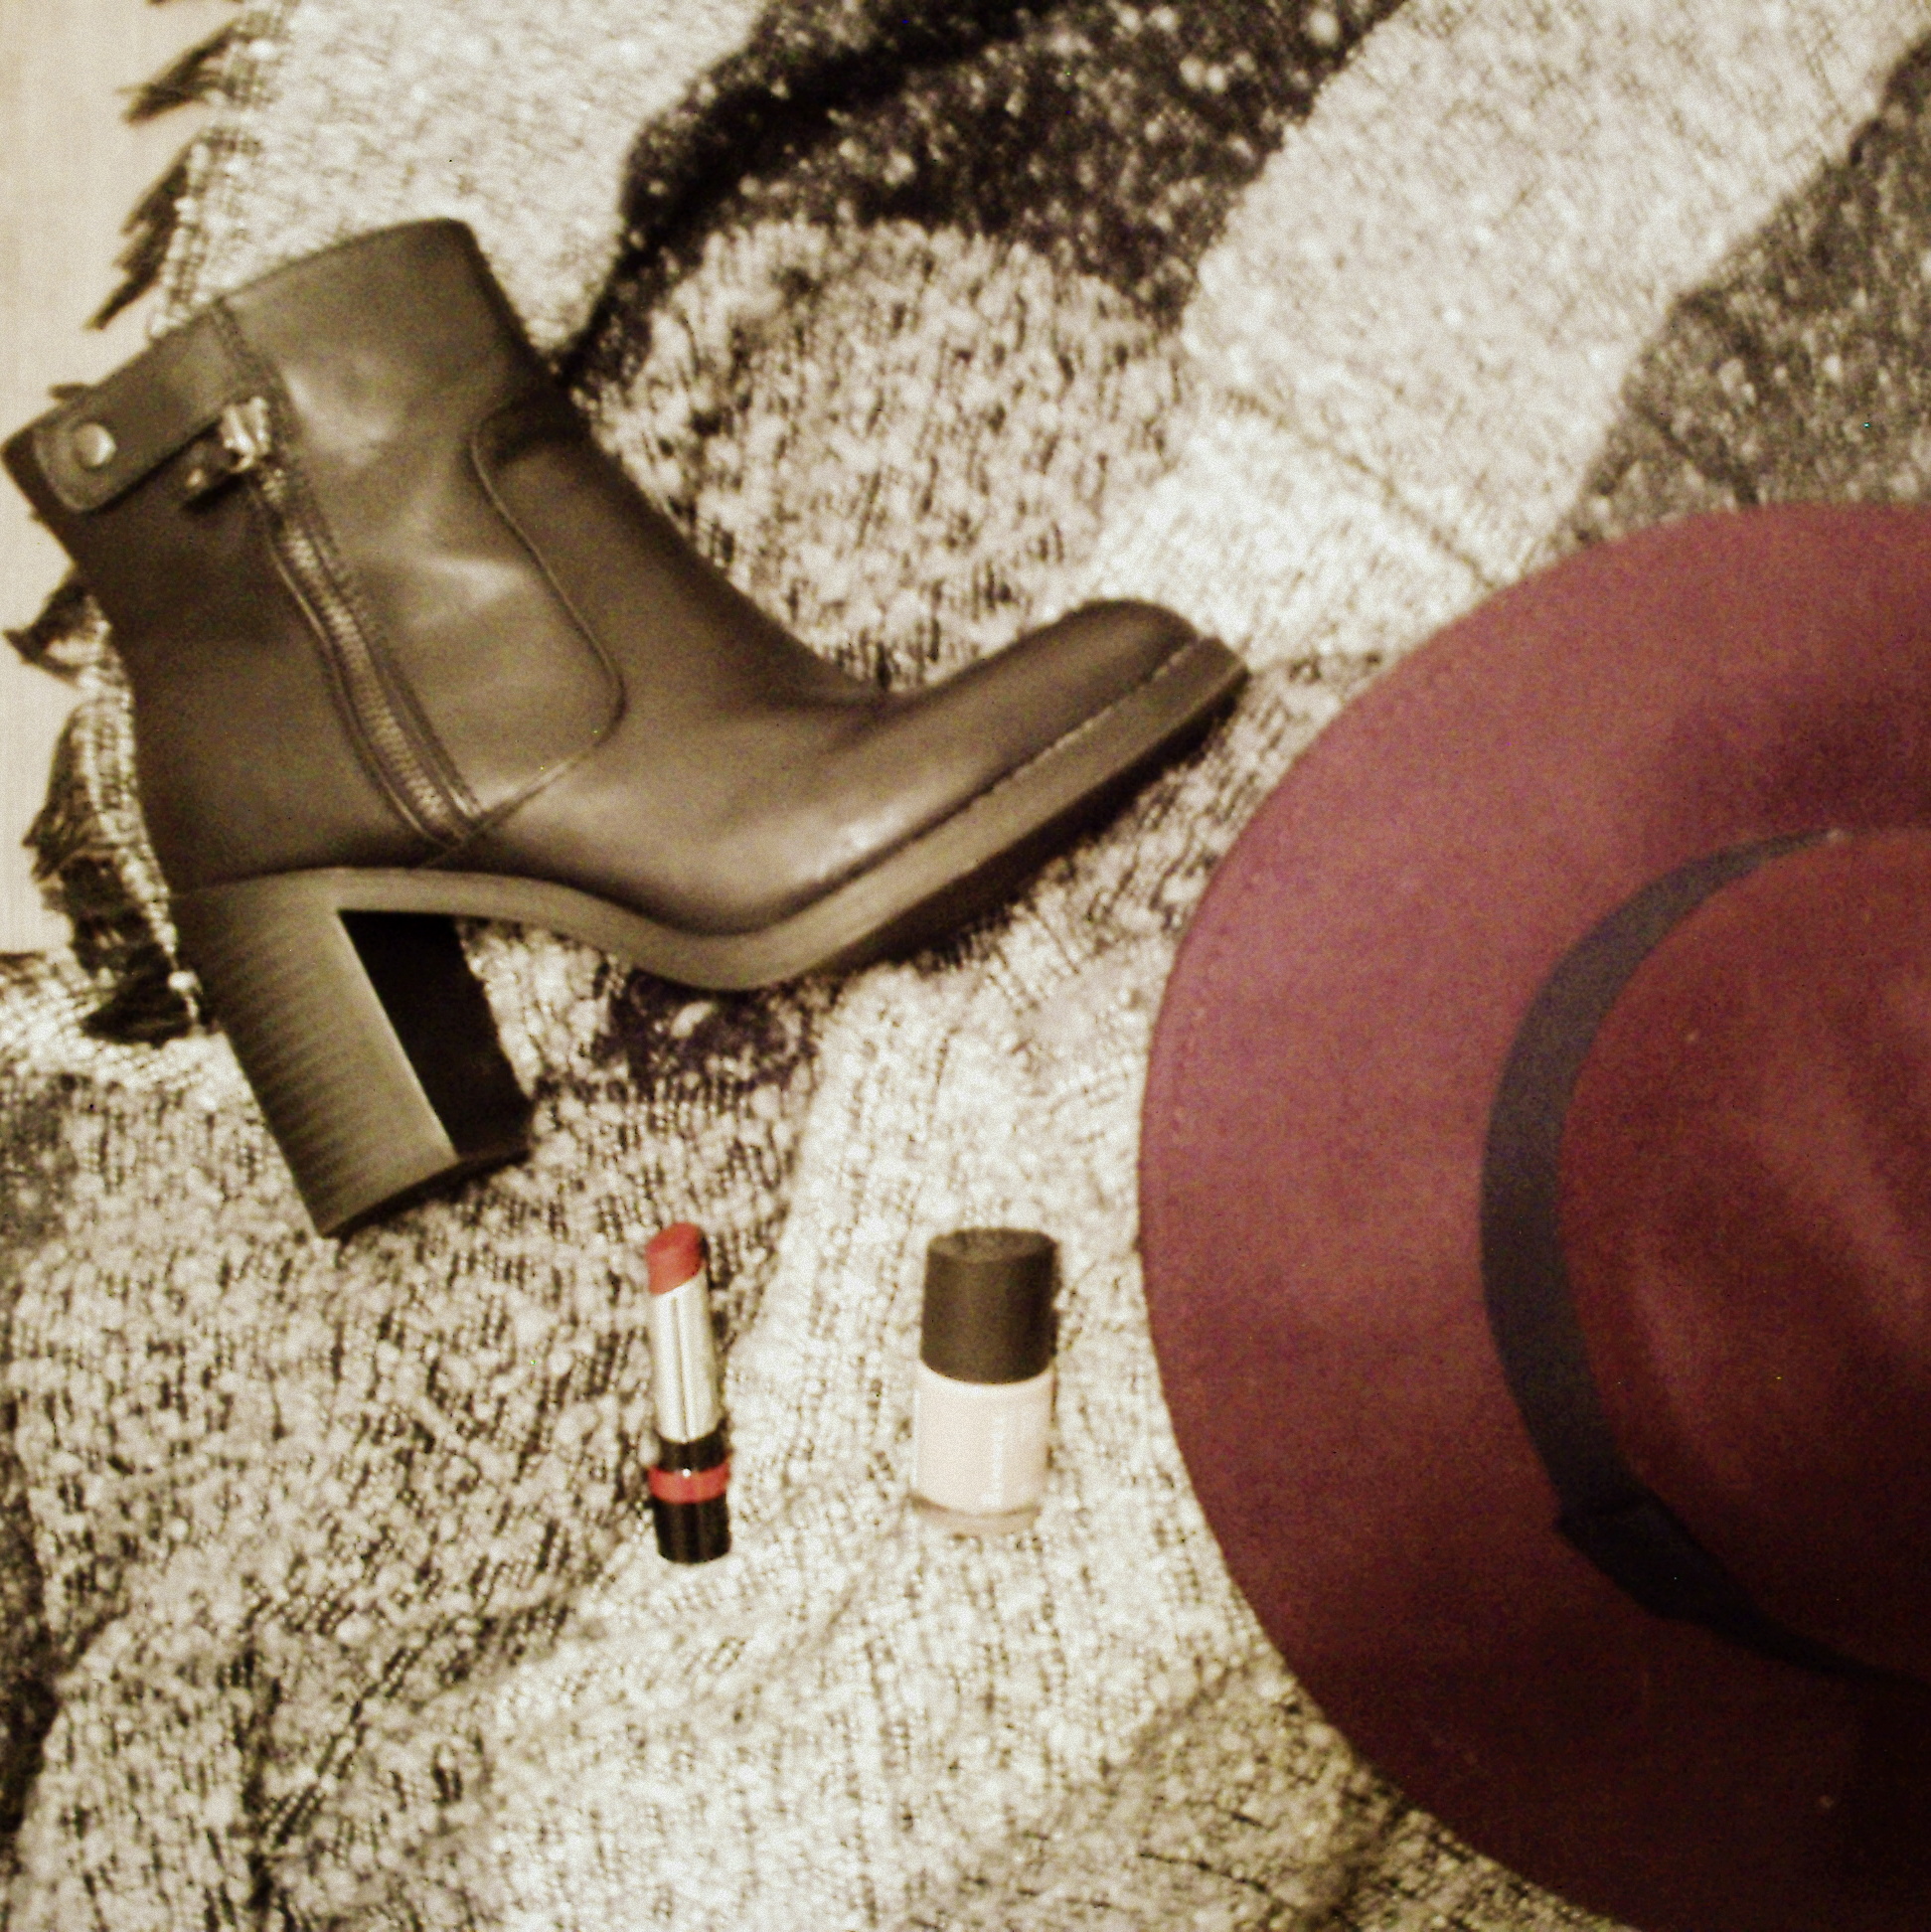 Autumn Winter Accessories that last for Years, Black Leather Ankle Boots, Dark Lipstick, Berry Trilby, Nude Nails, Big Scarf